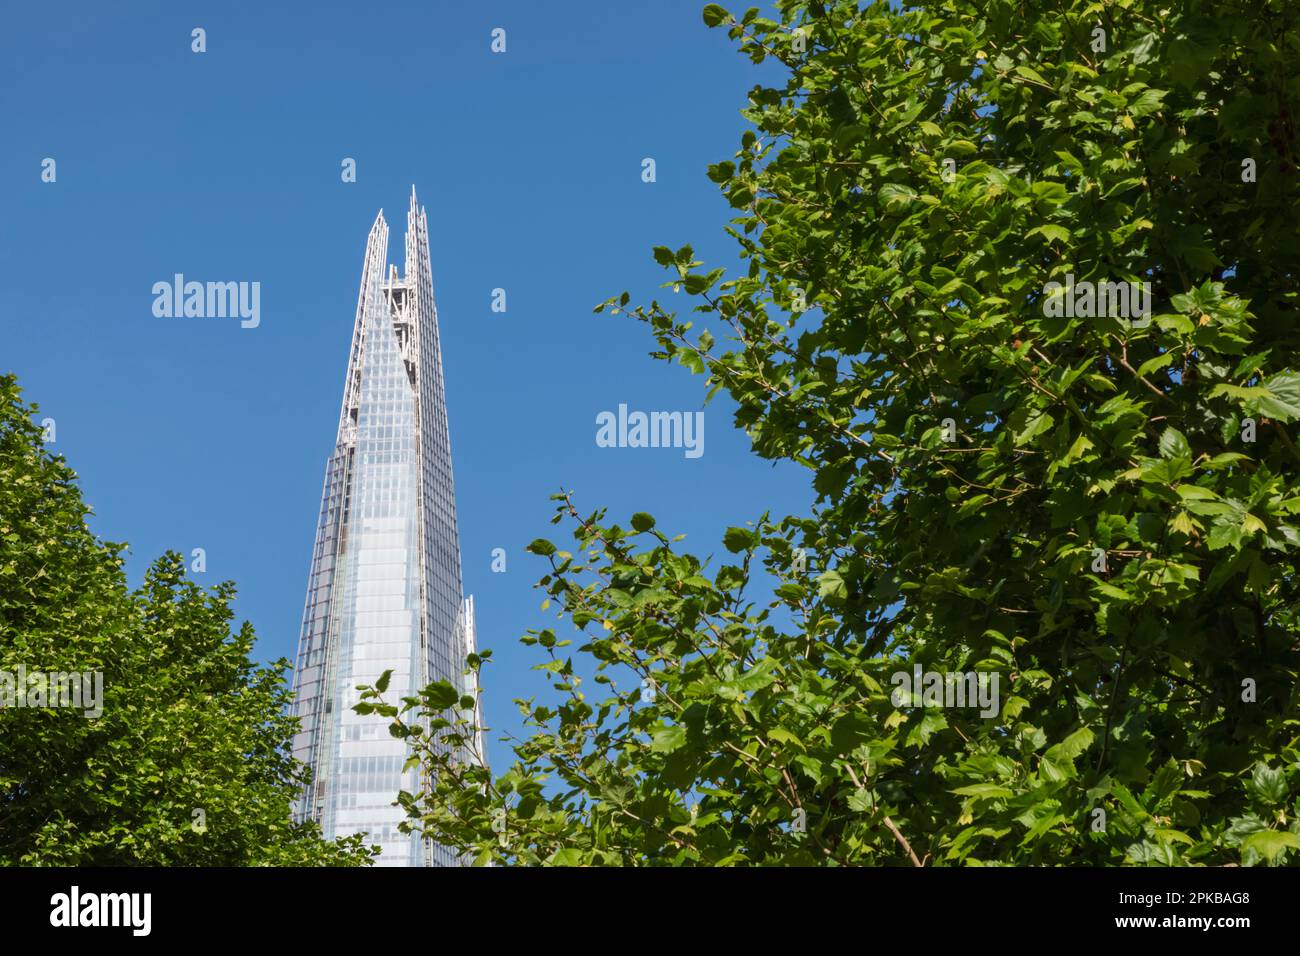 England, London, Green Trees and The Shard Stock Photo